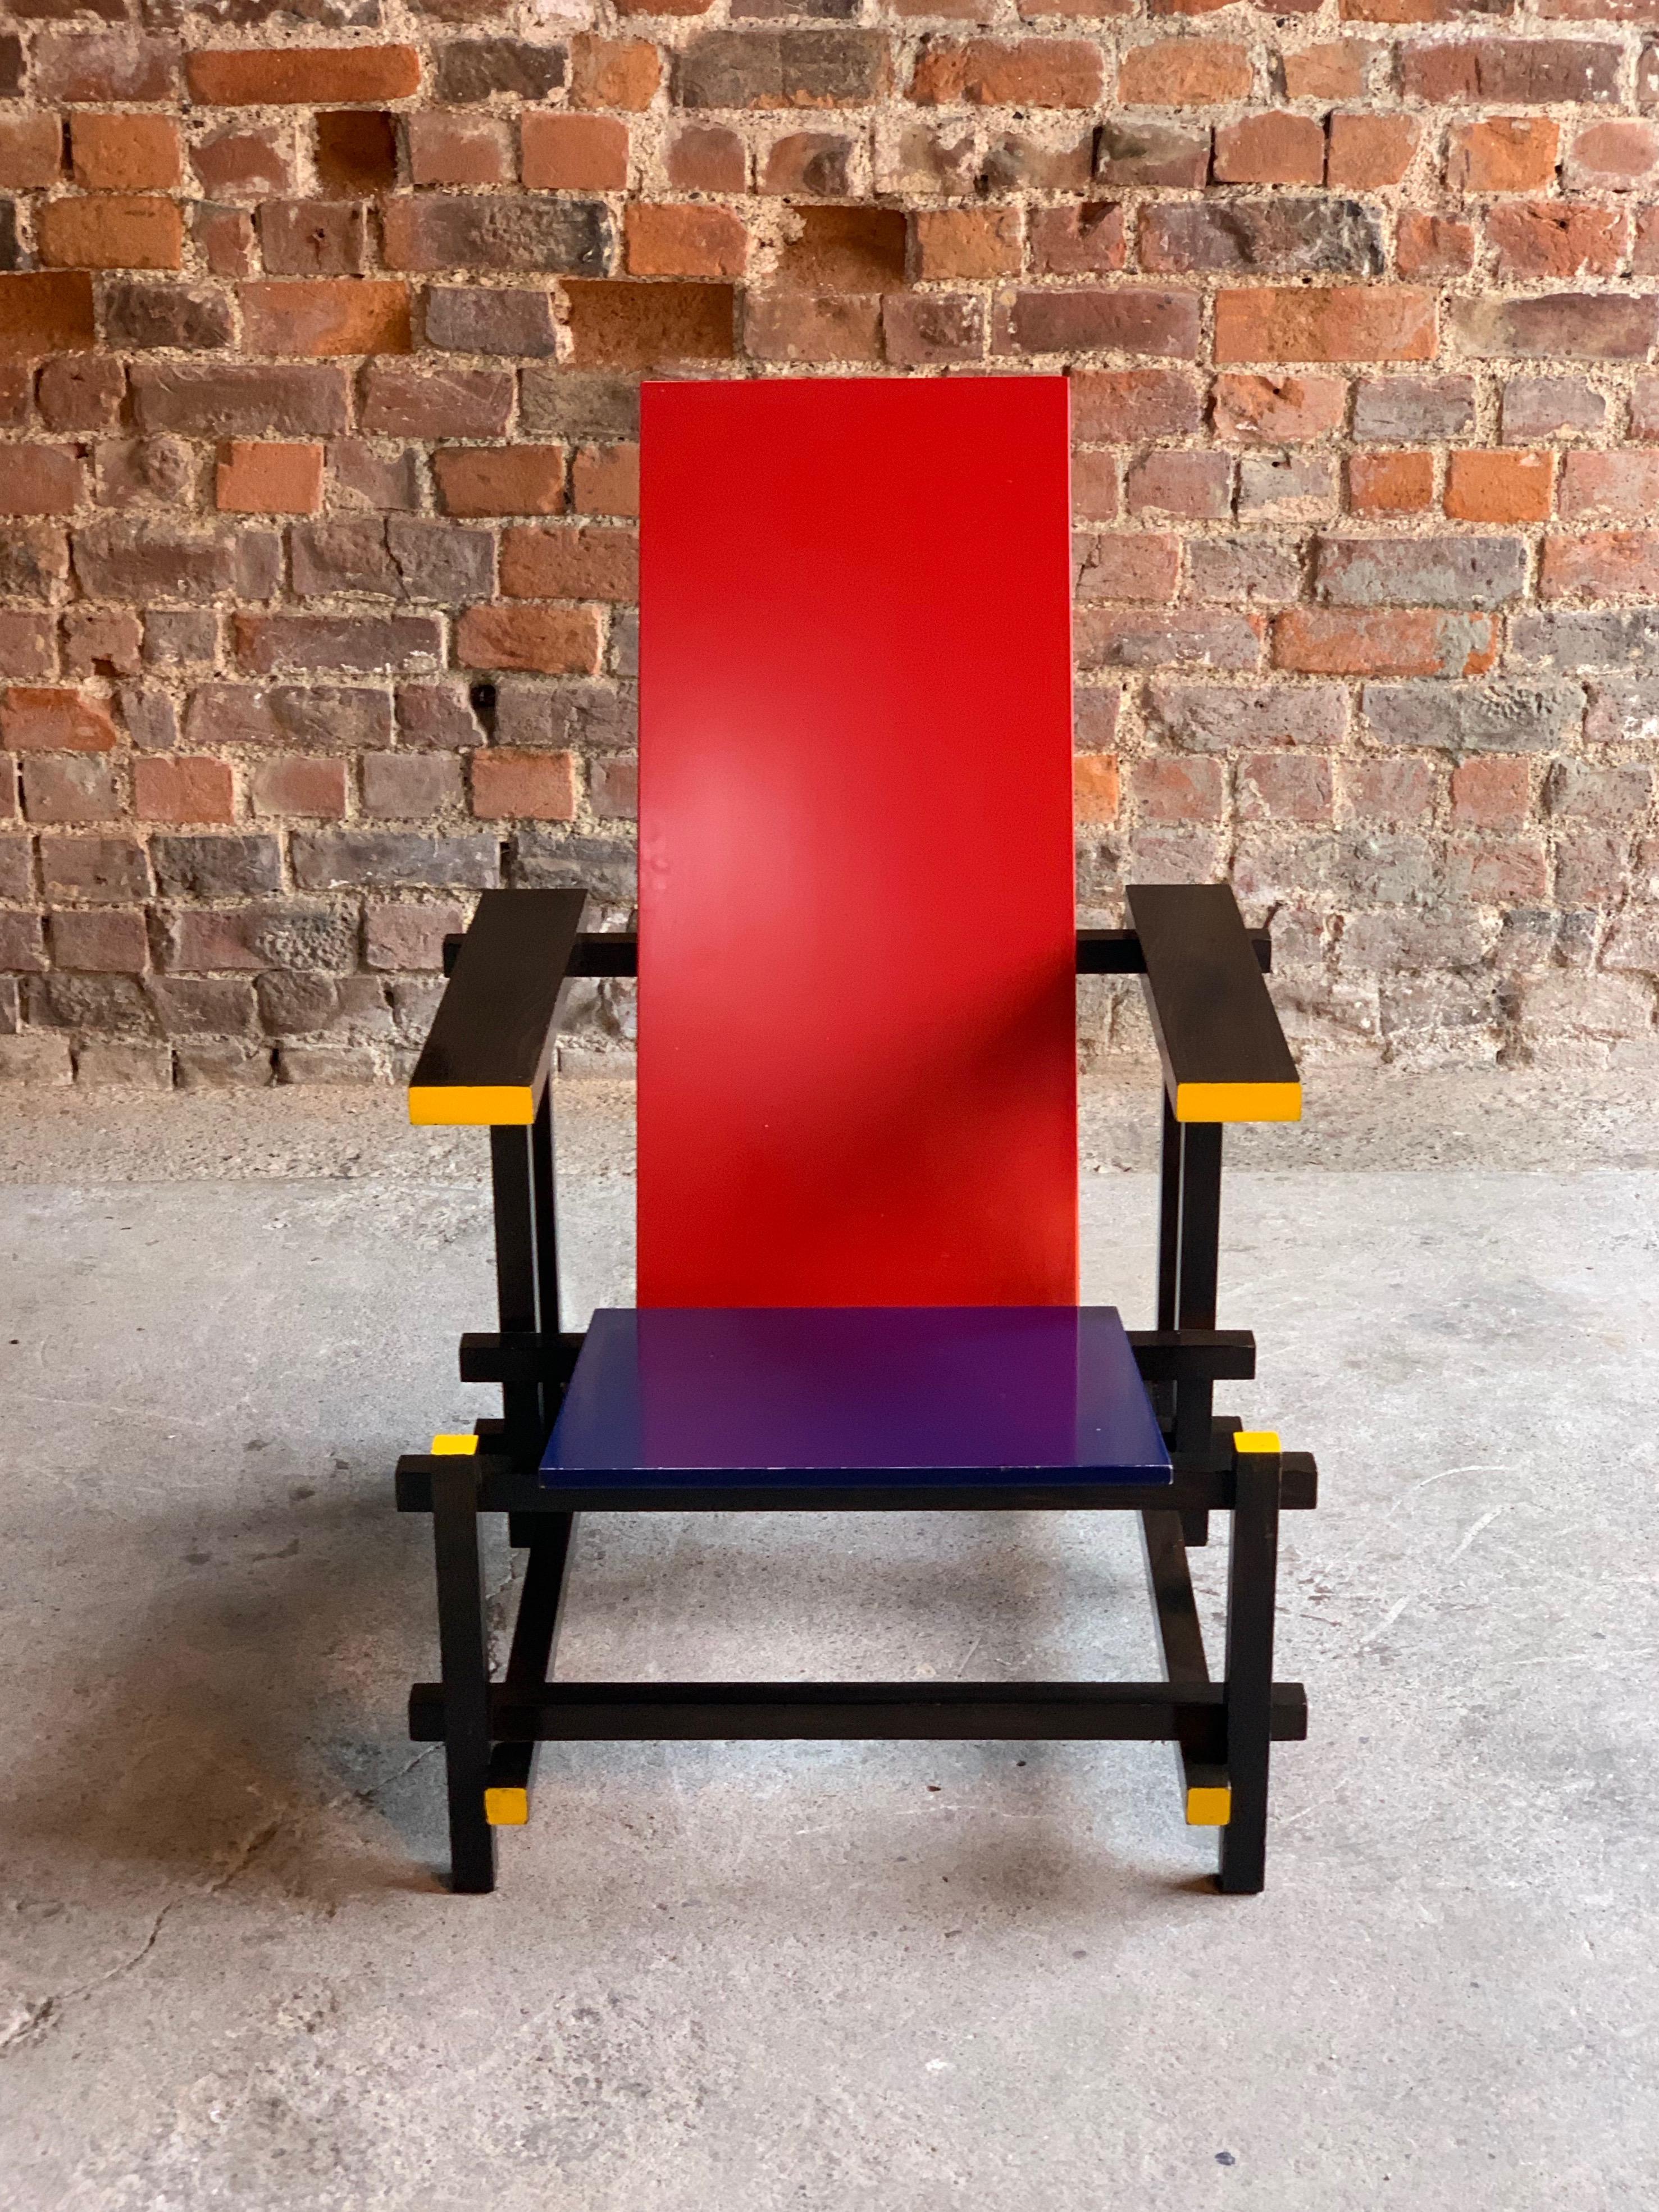 Beech Cassina Red and Blue Chair by Gerrit T Rietveld Numbered 8488, Italy, circa 1970